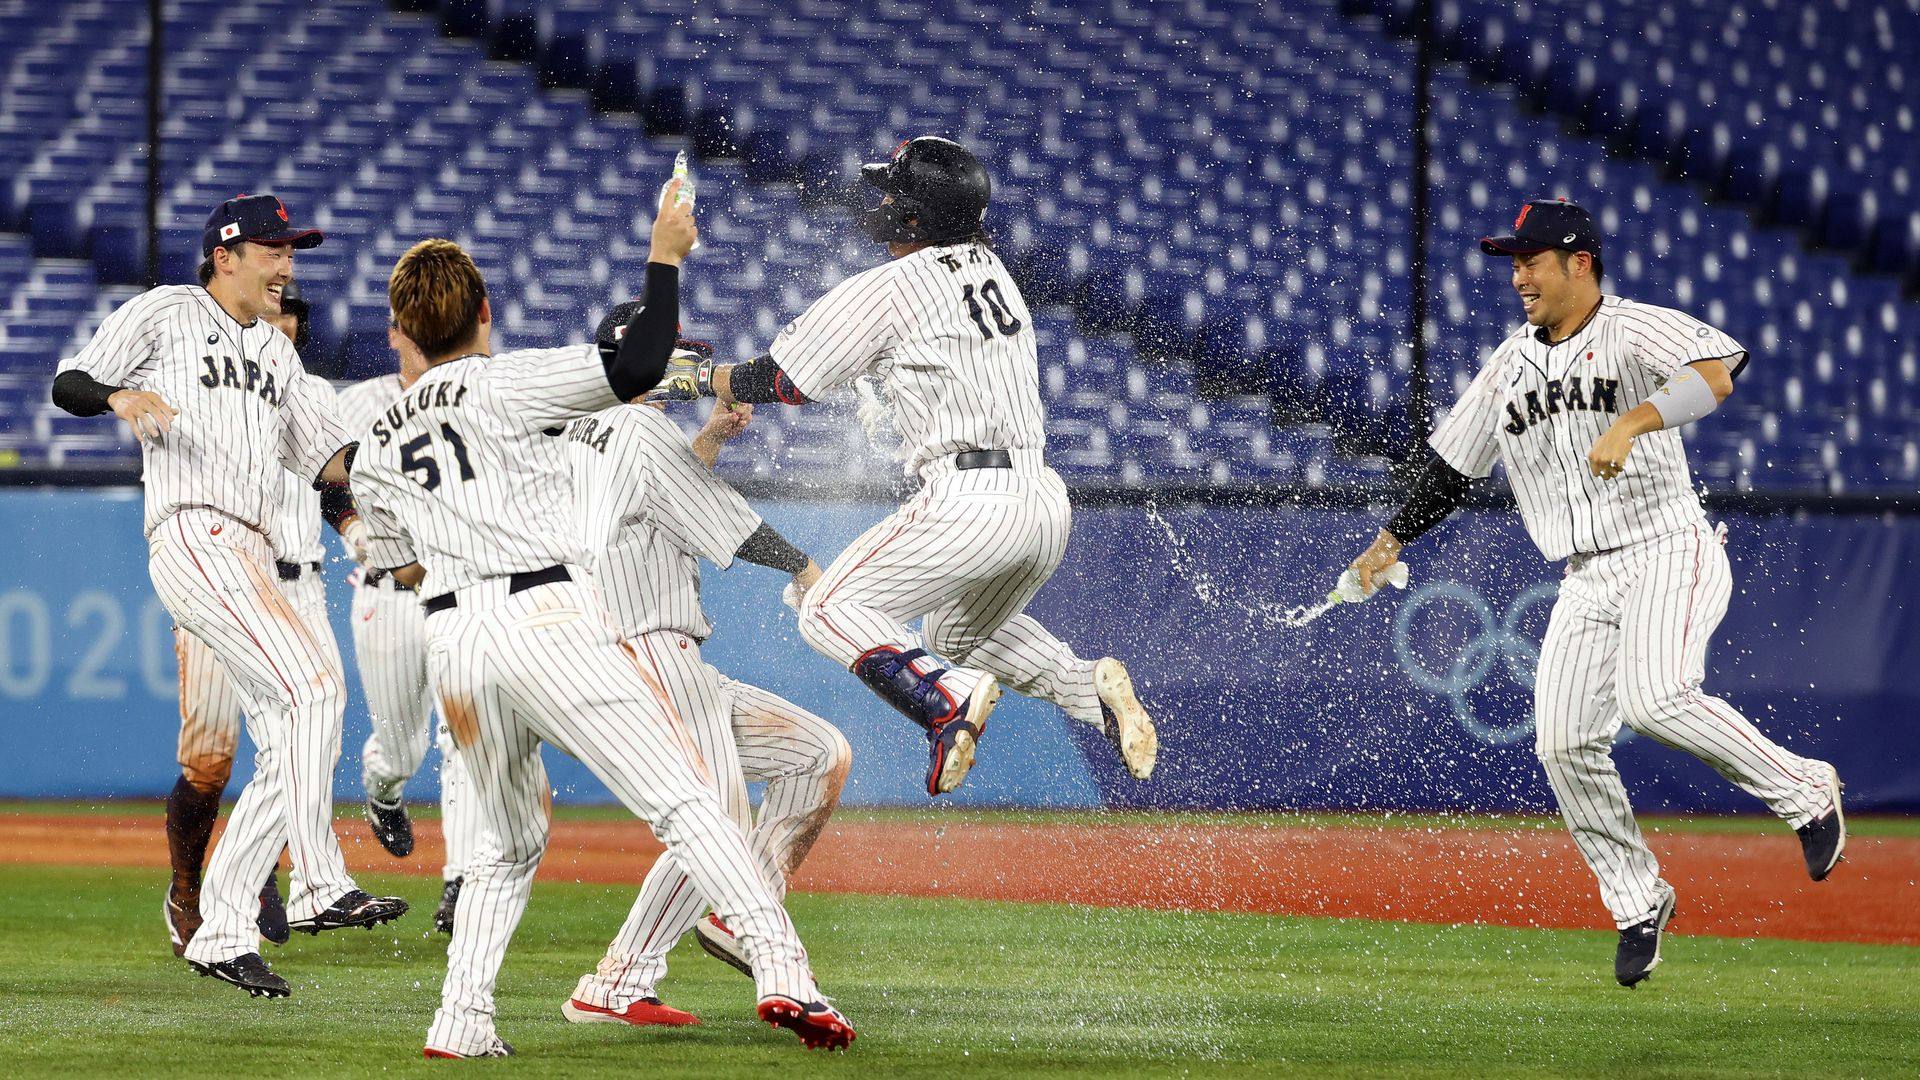 Team Japan celebrates with his teammates after hitting a game-winning single in the tenth inning to defeat Team United States